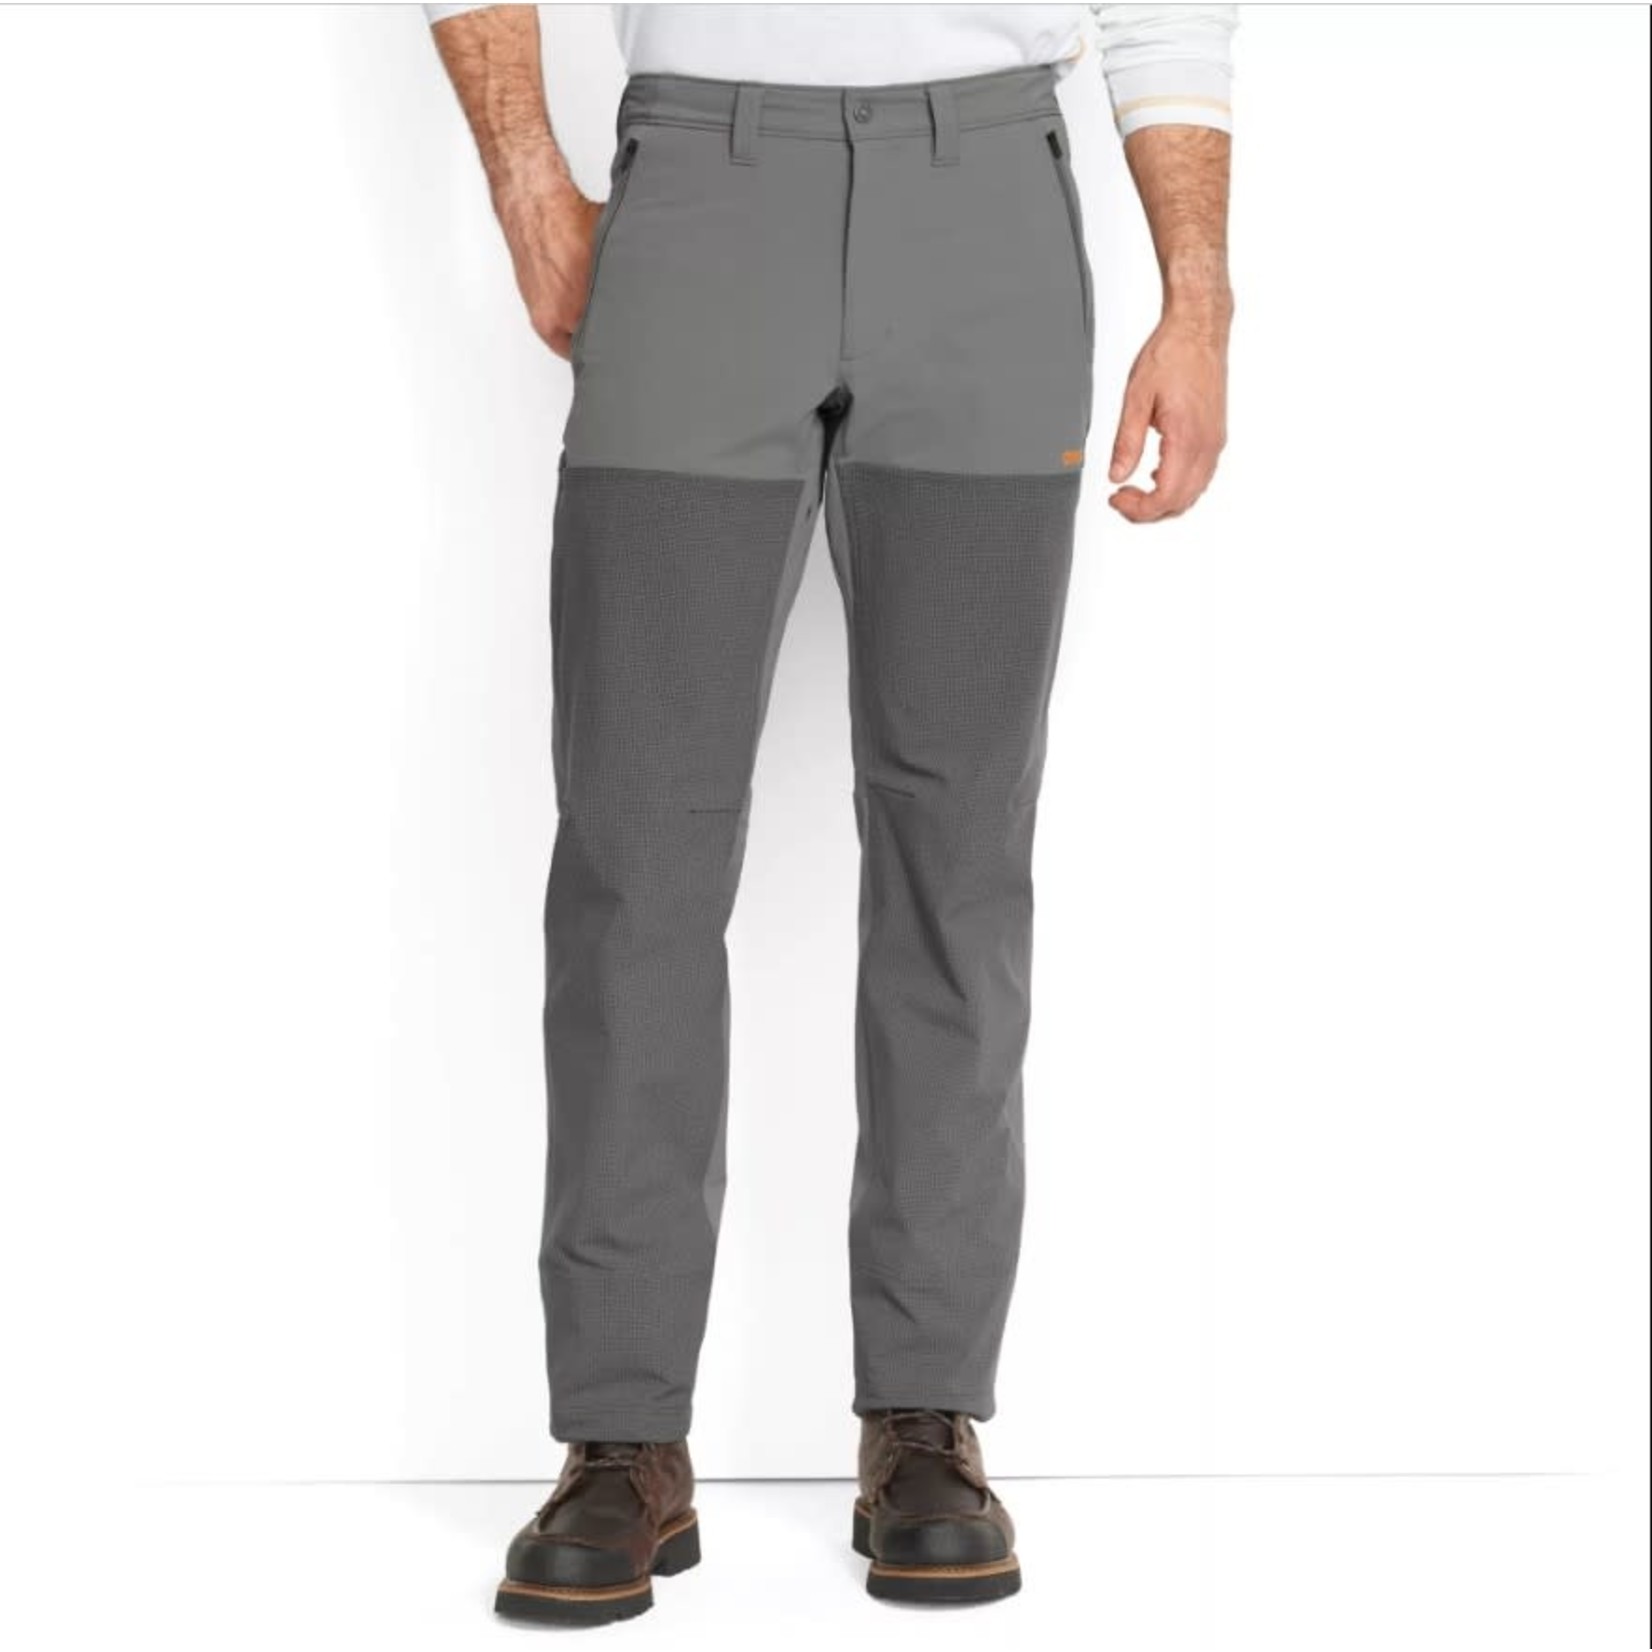 ORVIS UPLAND HUNTING SOFTSHELL PANTS - Black Dog Outdoor Sports